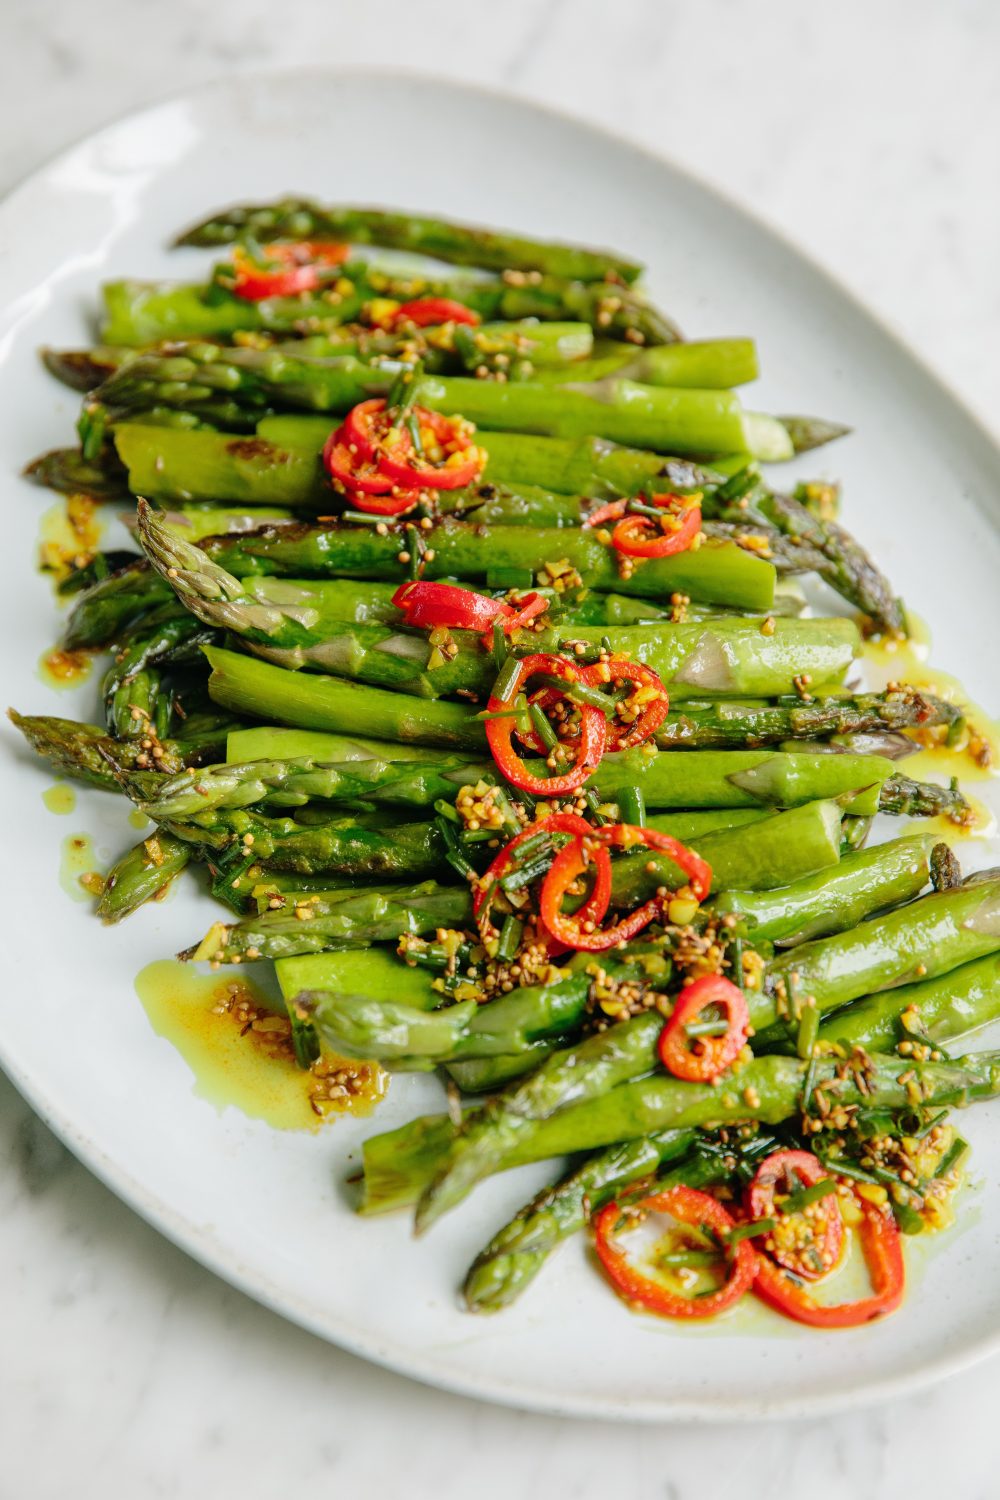 pan-roasted-asparagus-spiced-oil-chives